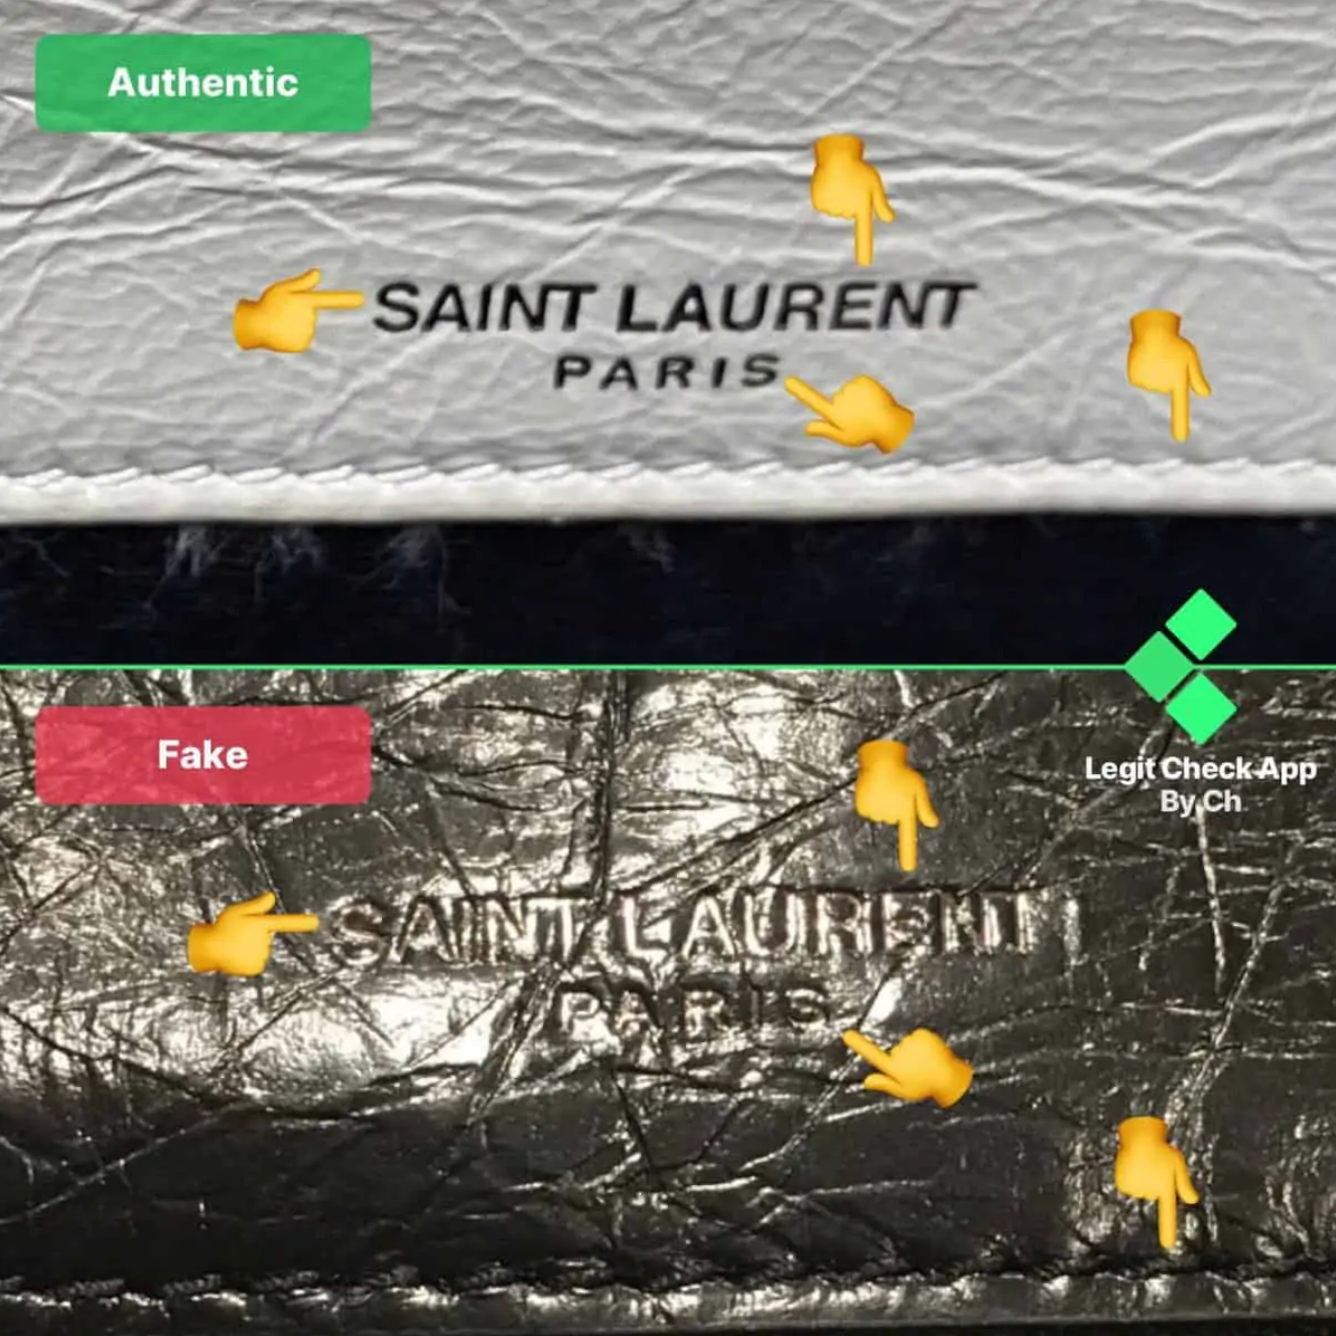 How Can You Tell an Authentic YSL Bag from a Fake? – HG Bags Online